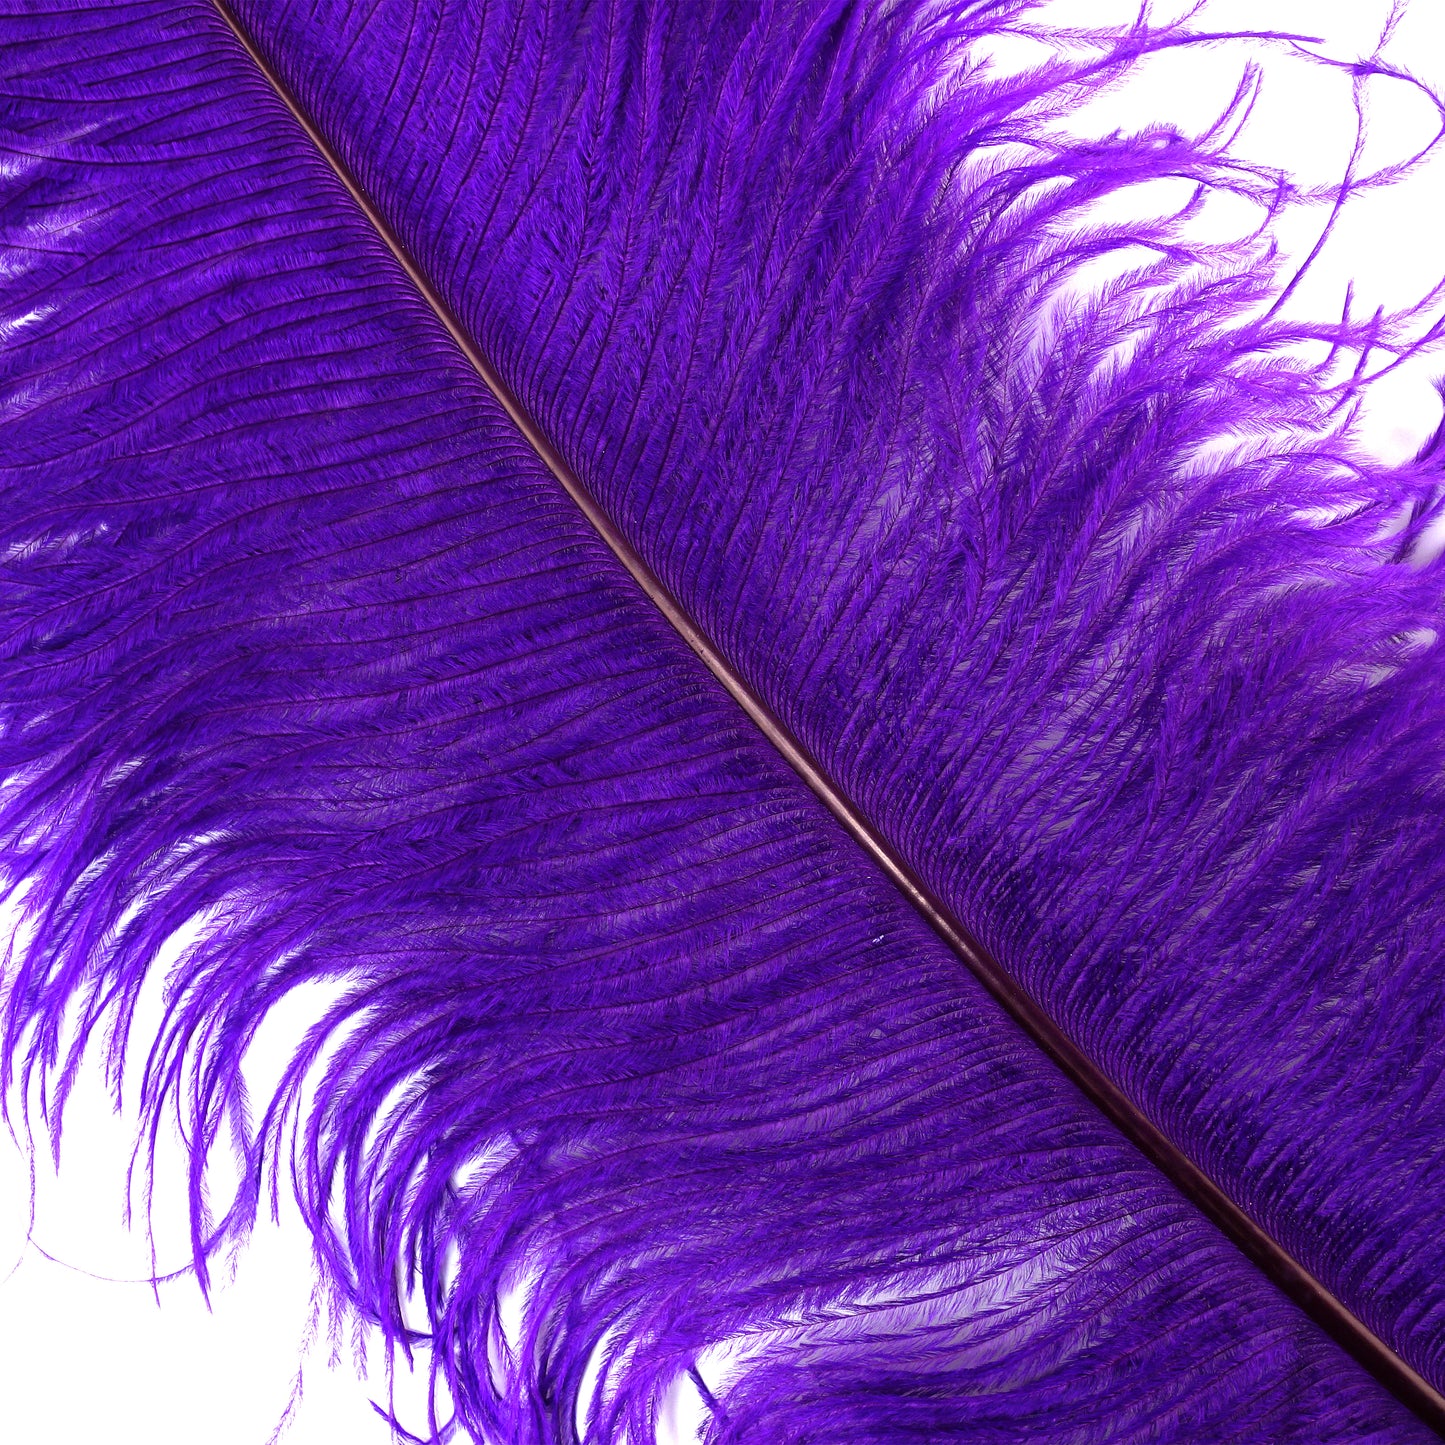 Large Ostrich Feathers - 24-30" Prime Femina Plumes - Regal